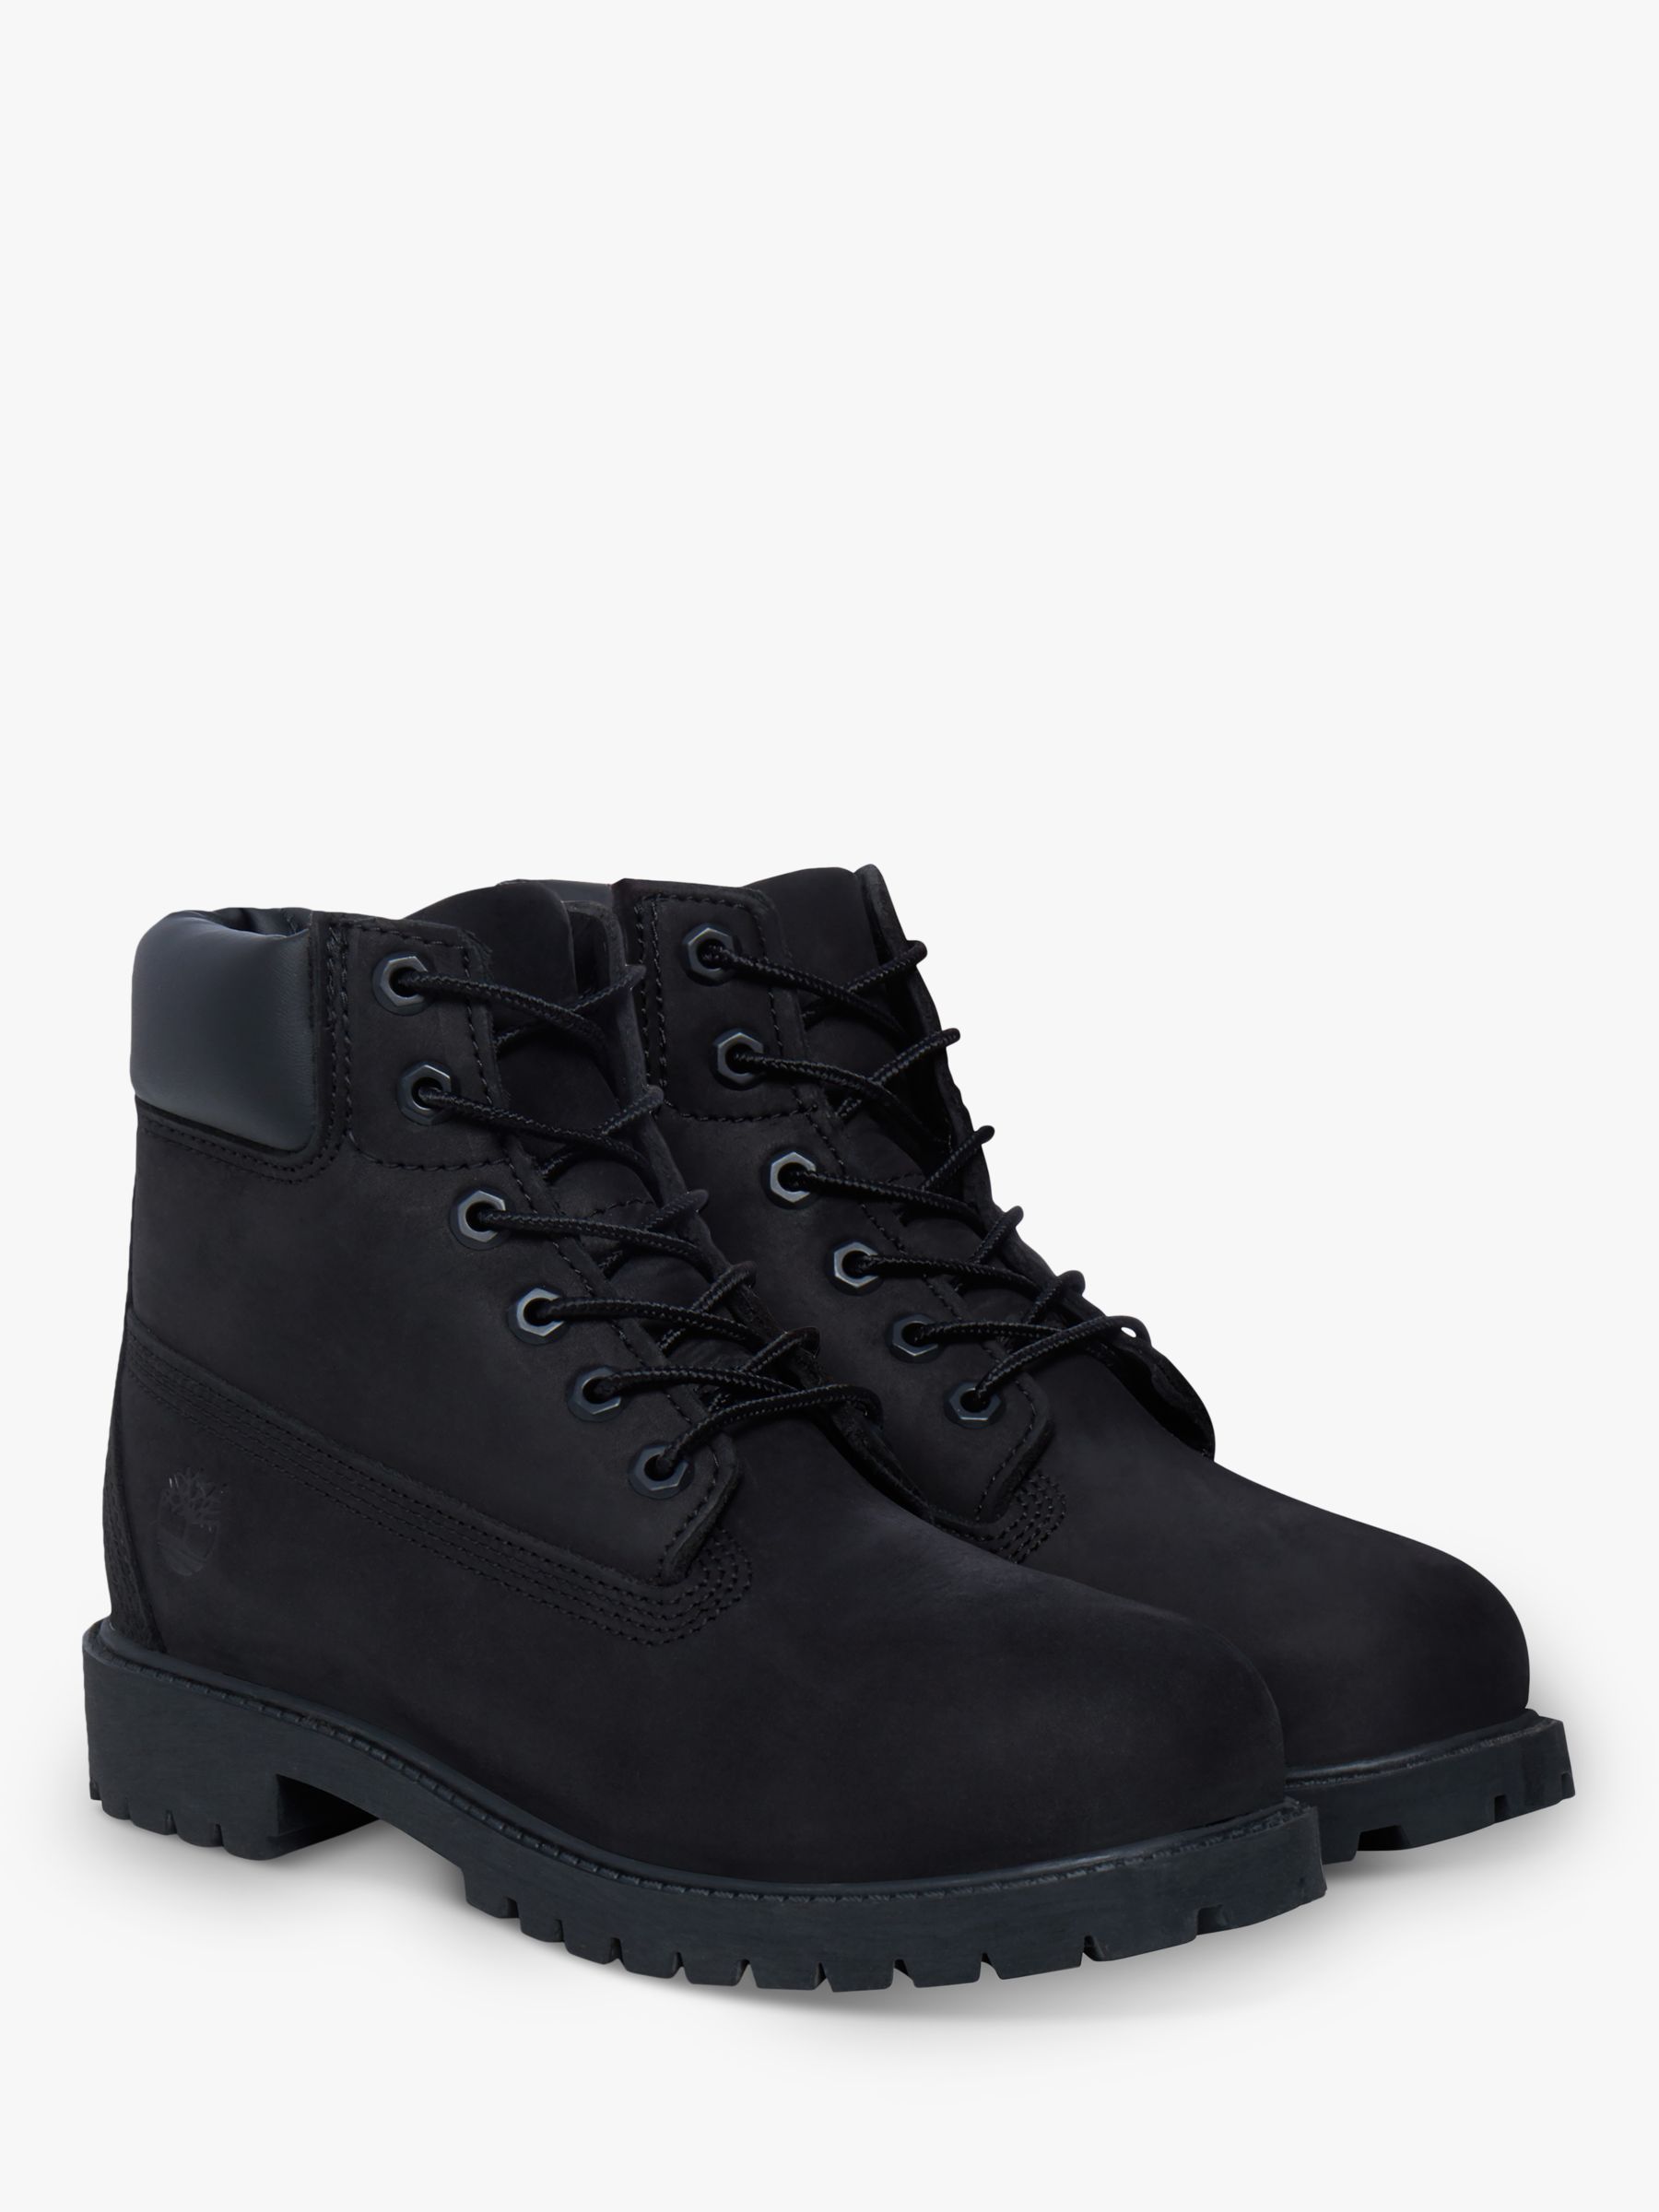 timberland classic 6 inch premium boots in black